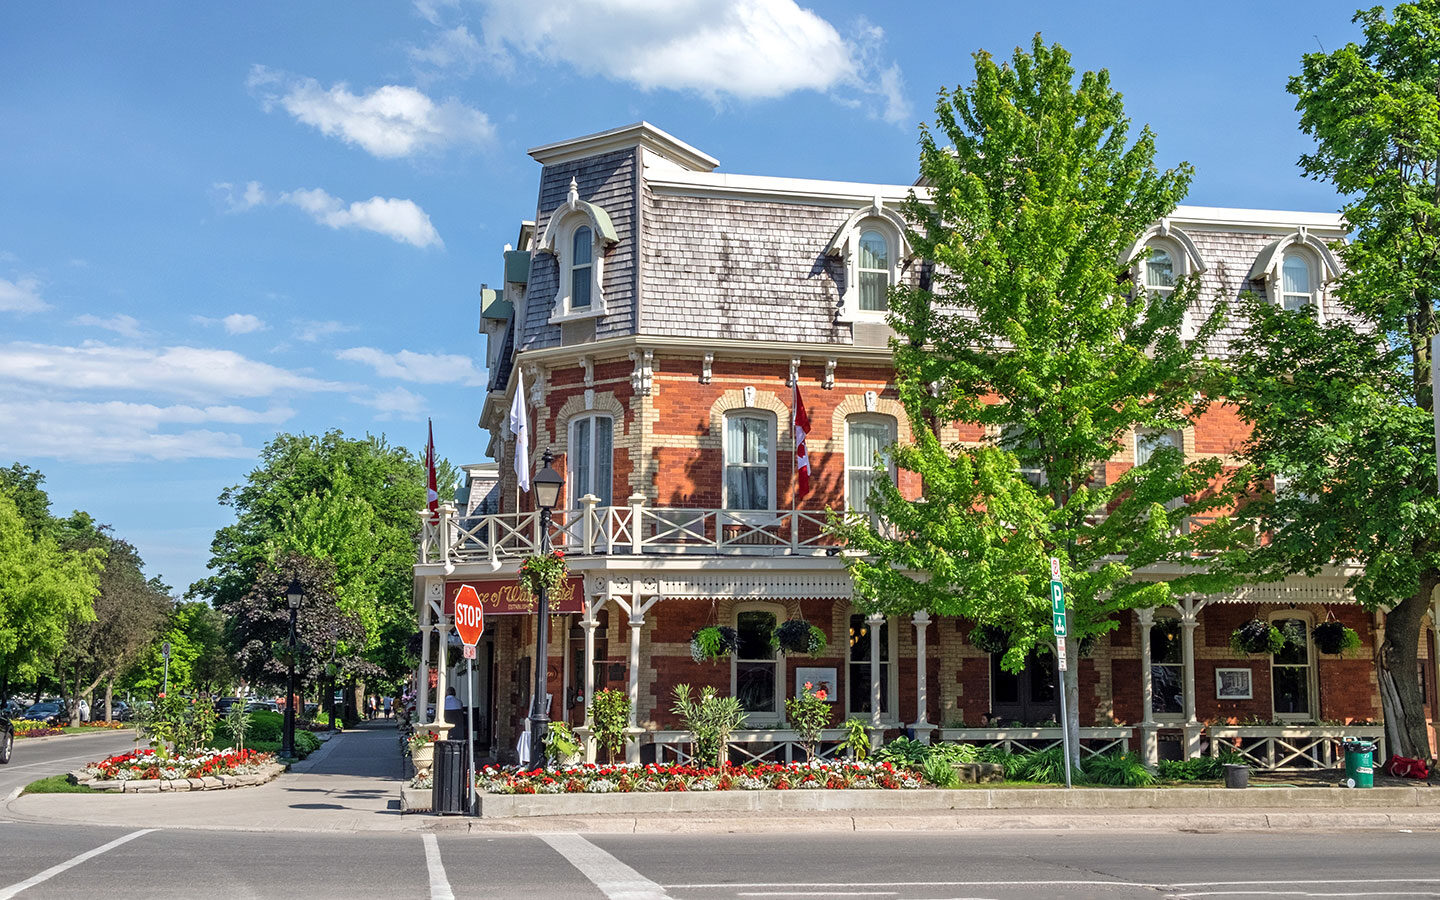 The Prince of Wales Hotel in Niagara on the Lake